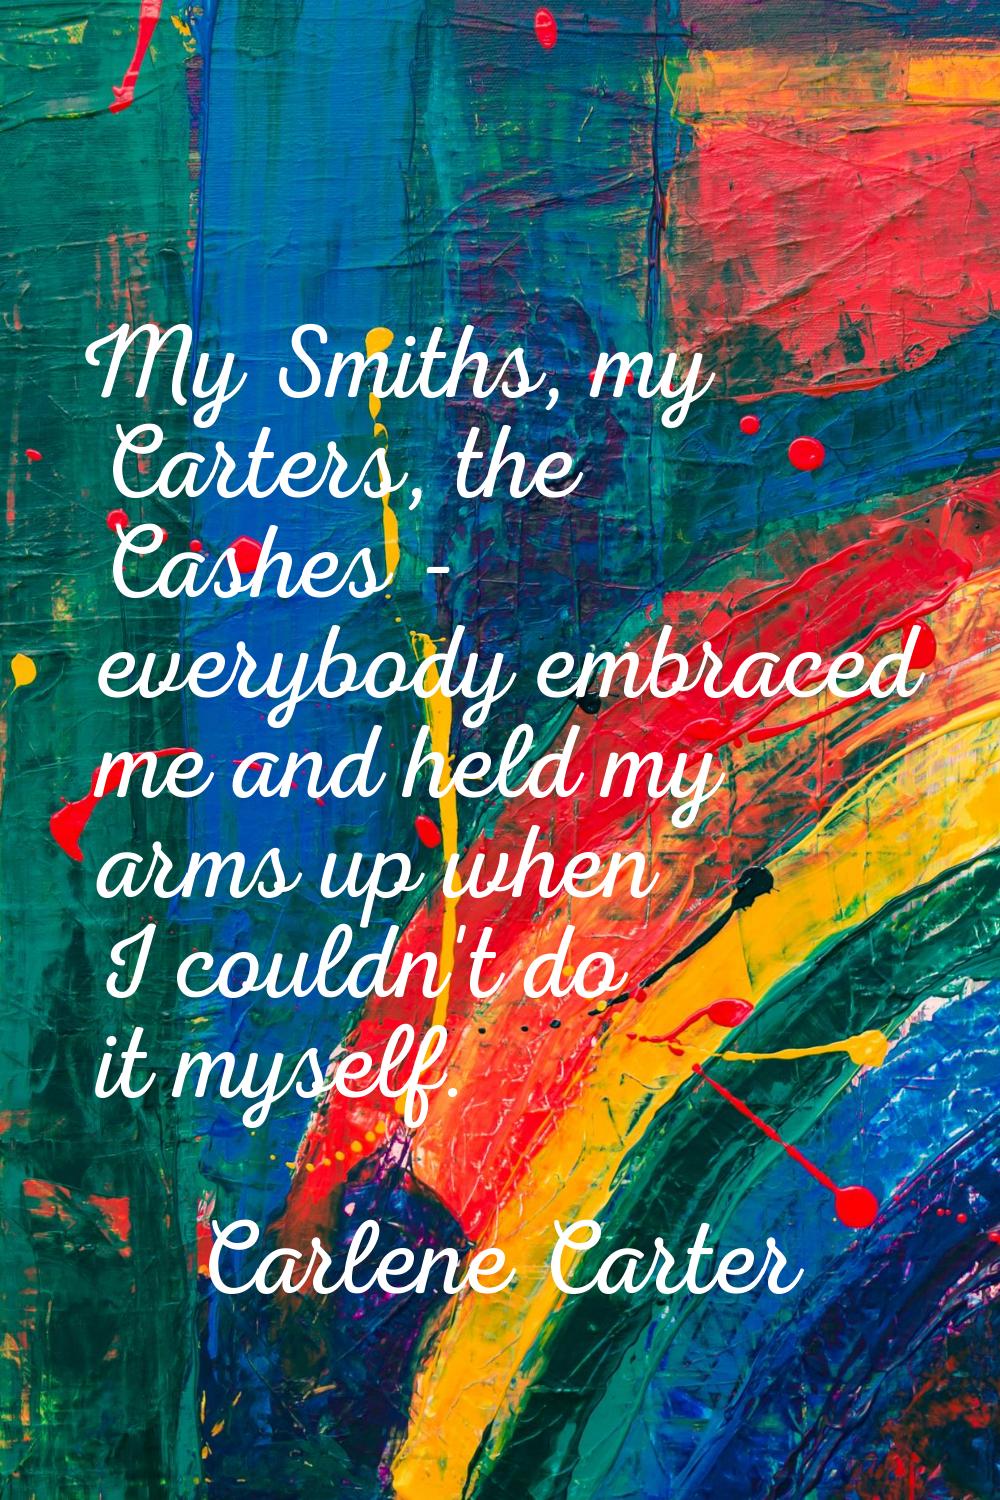 My Smiths, my Carters, the Cashes - everybody embraced me and held my arms up when I couldn't do it